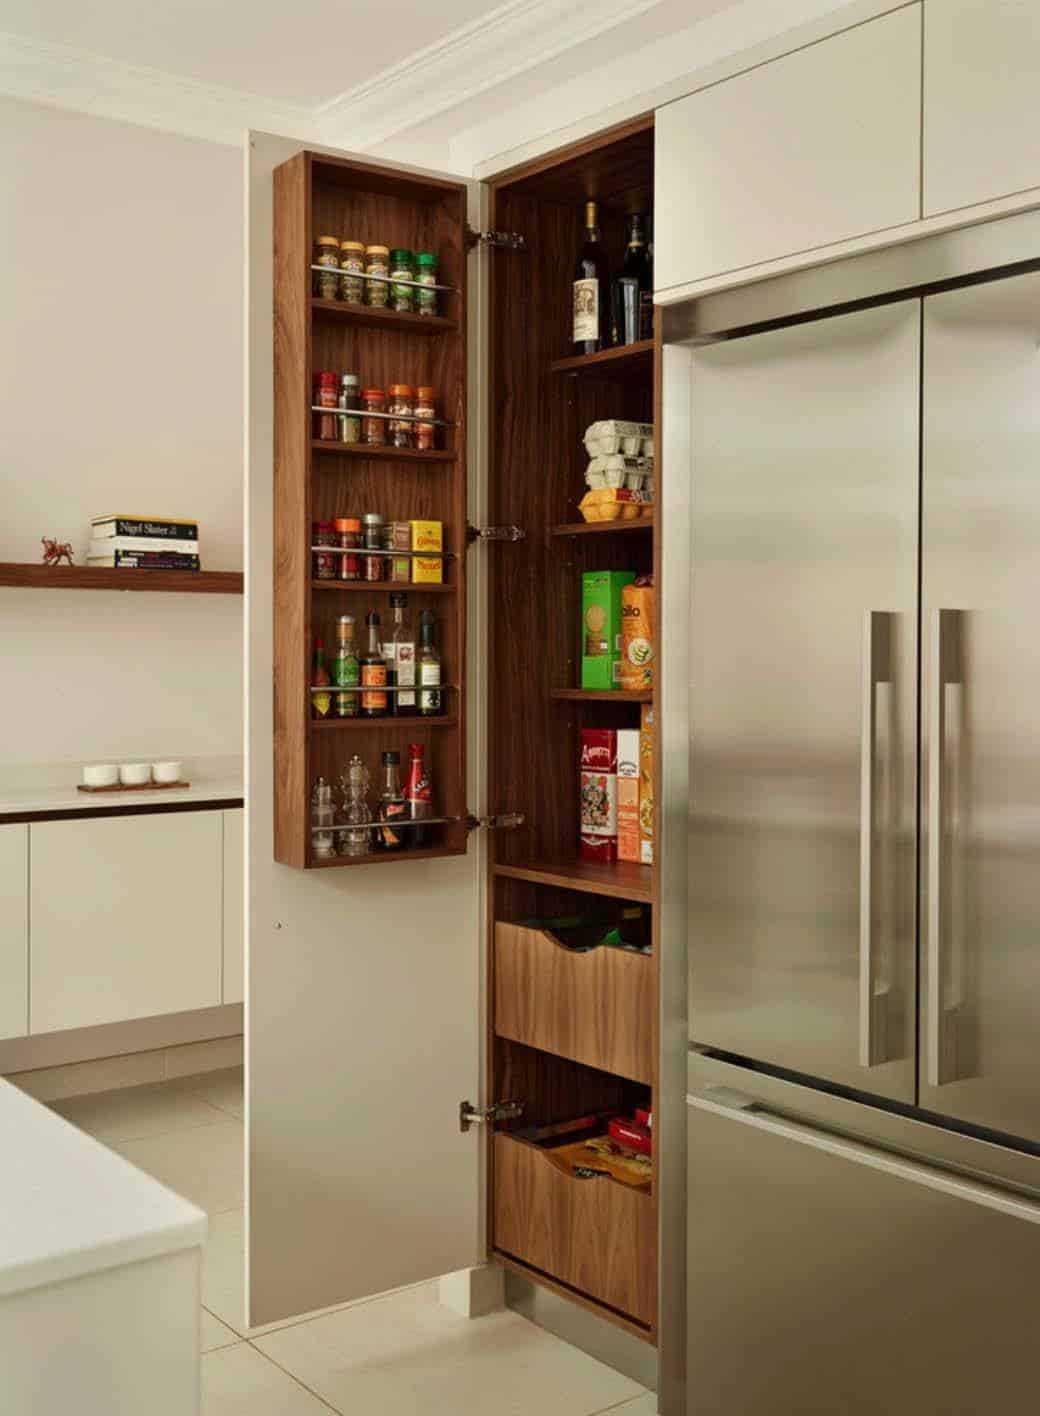 Pantry For Small Kitchen
 35 Clever ideas to help organize your kitchen pantry